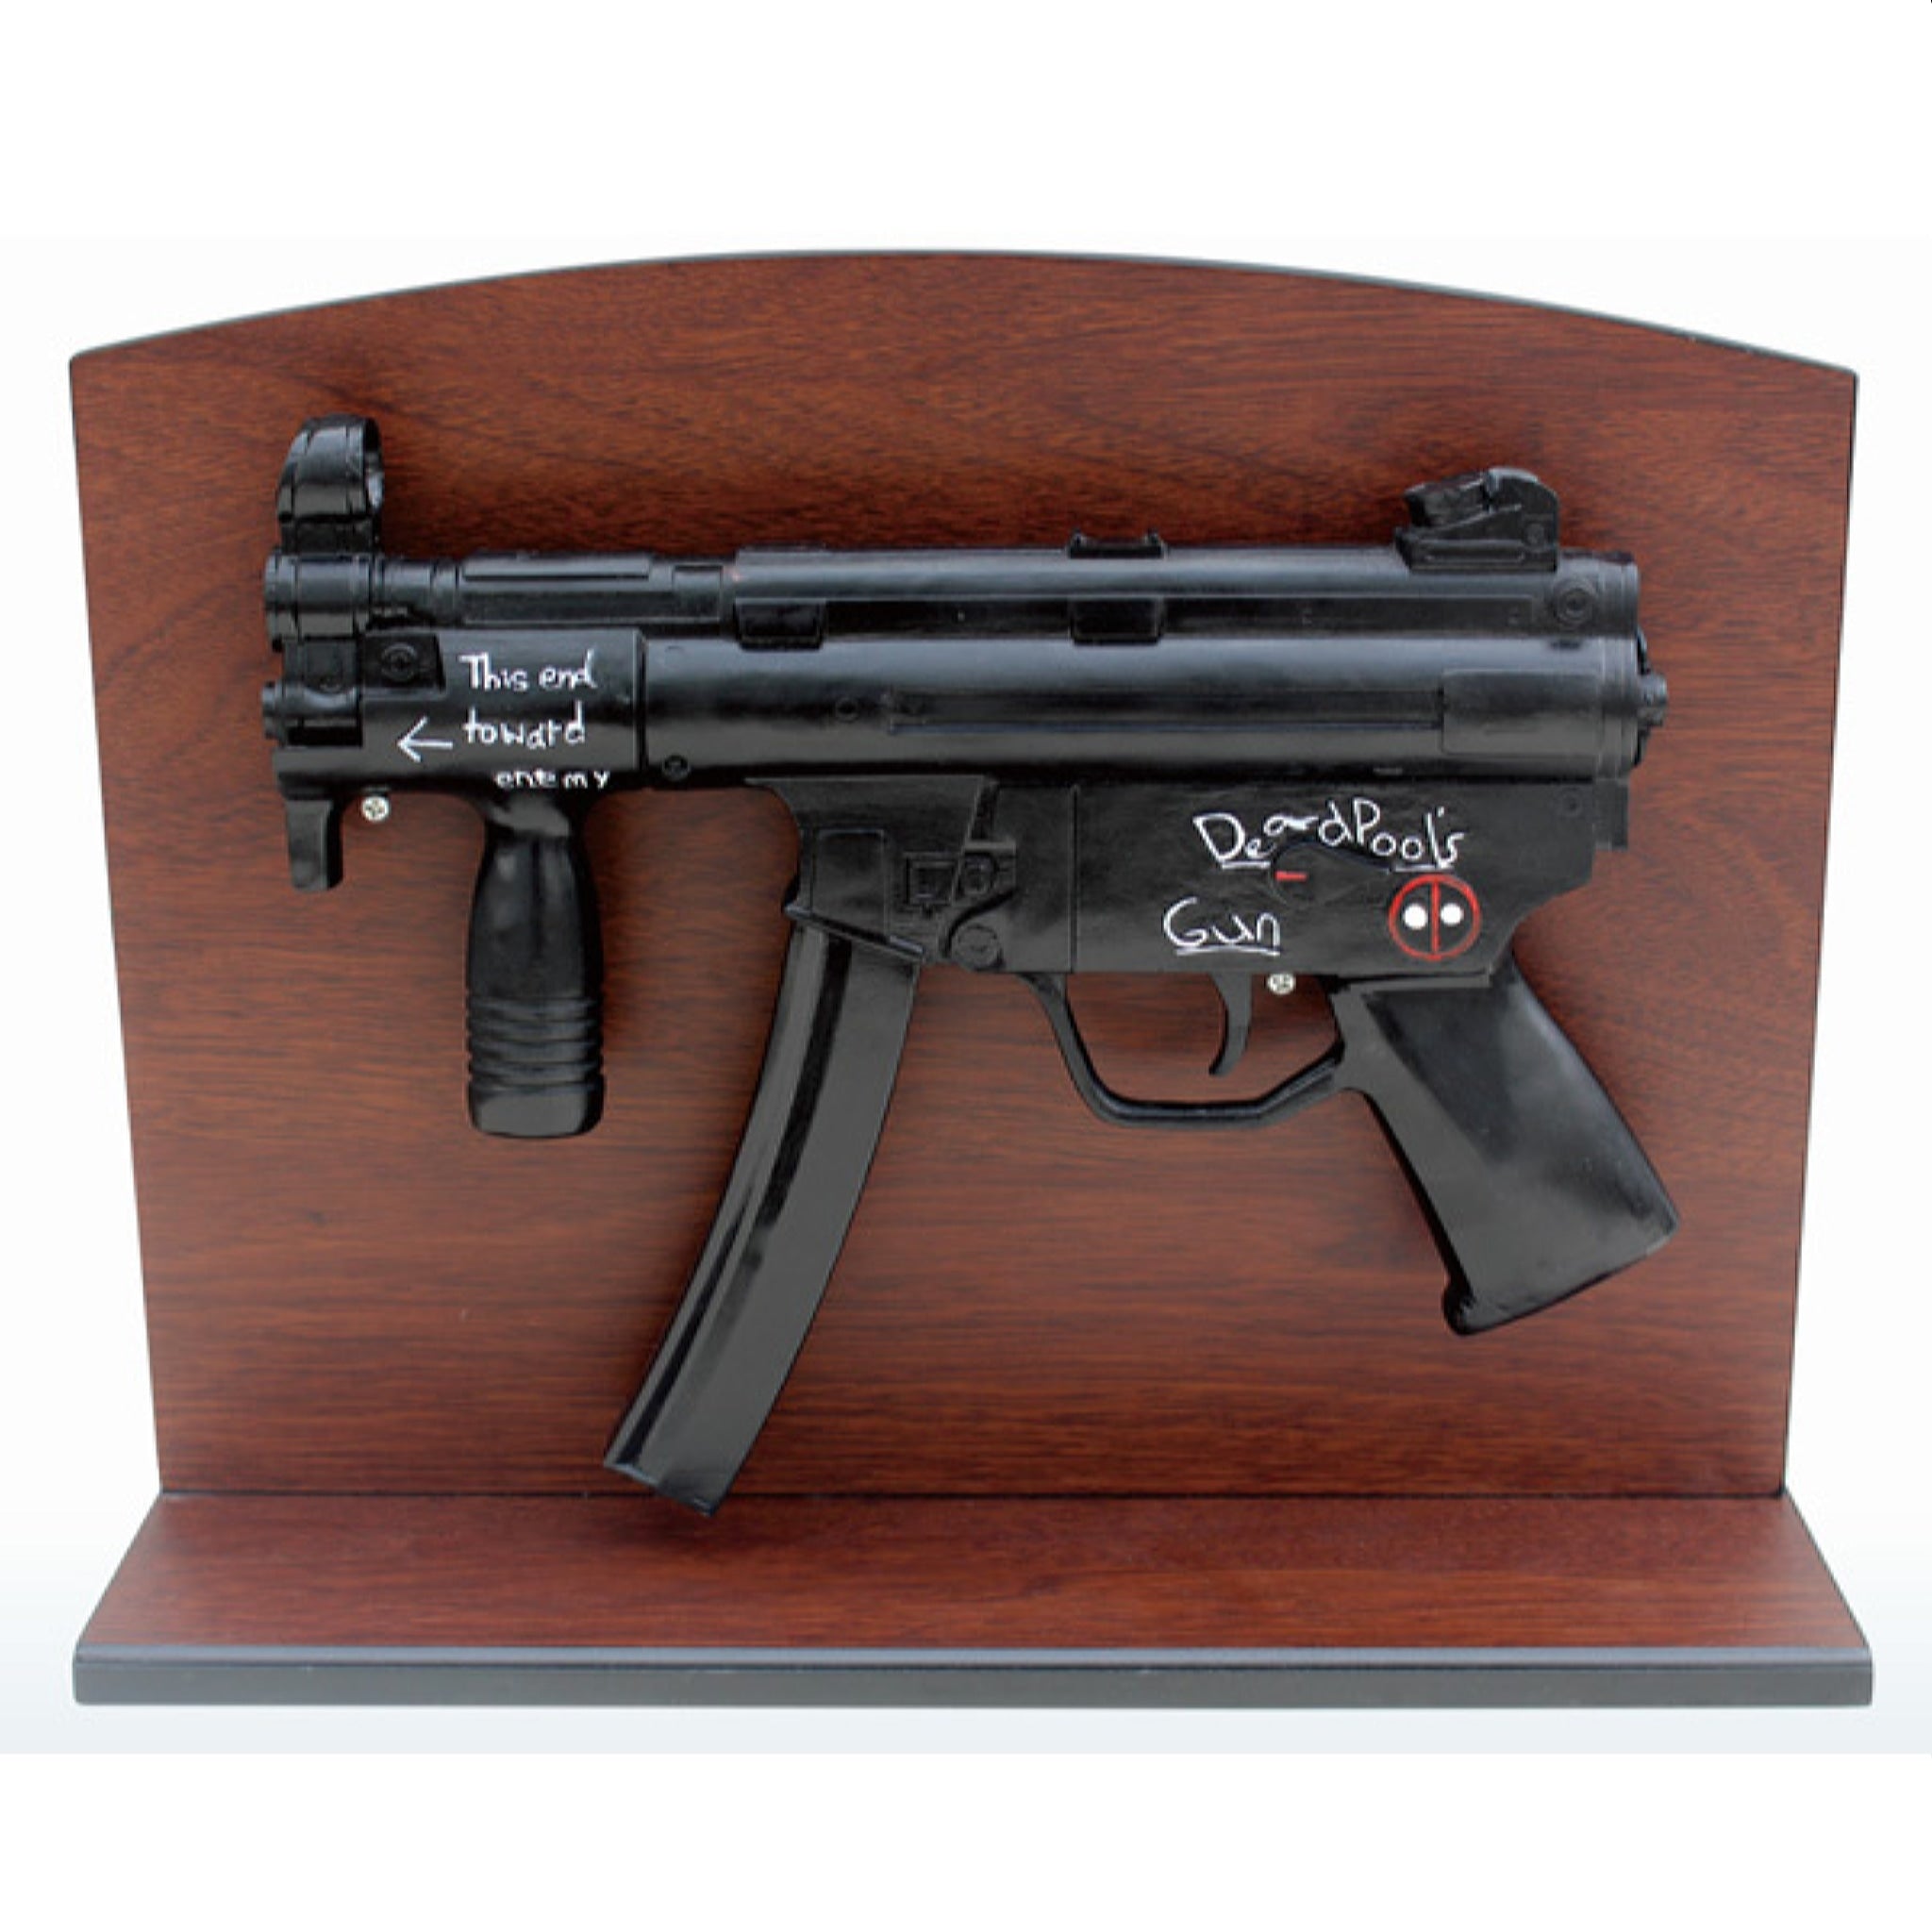 Deadpool Modified MP5k Submachine Pistol Resin with Display Stand Cosplay Prop Replica